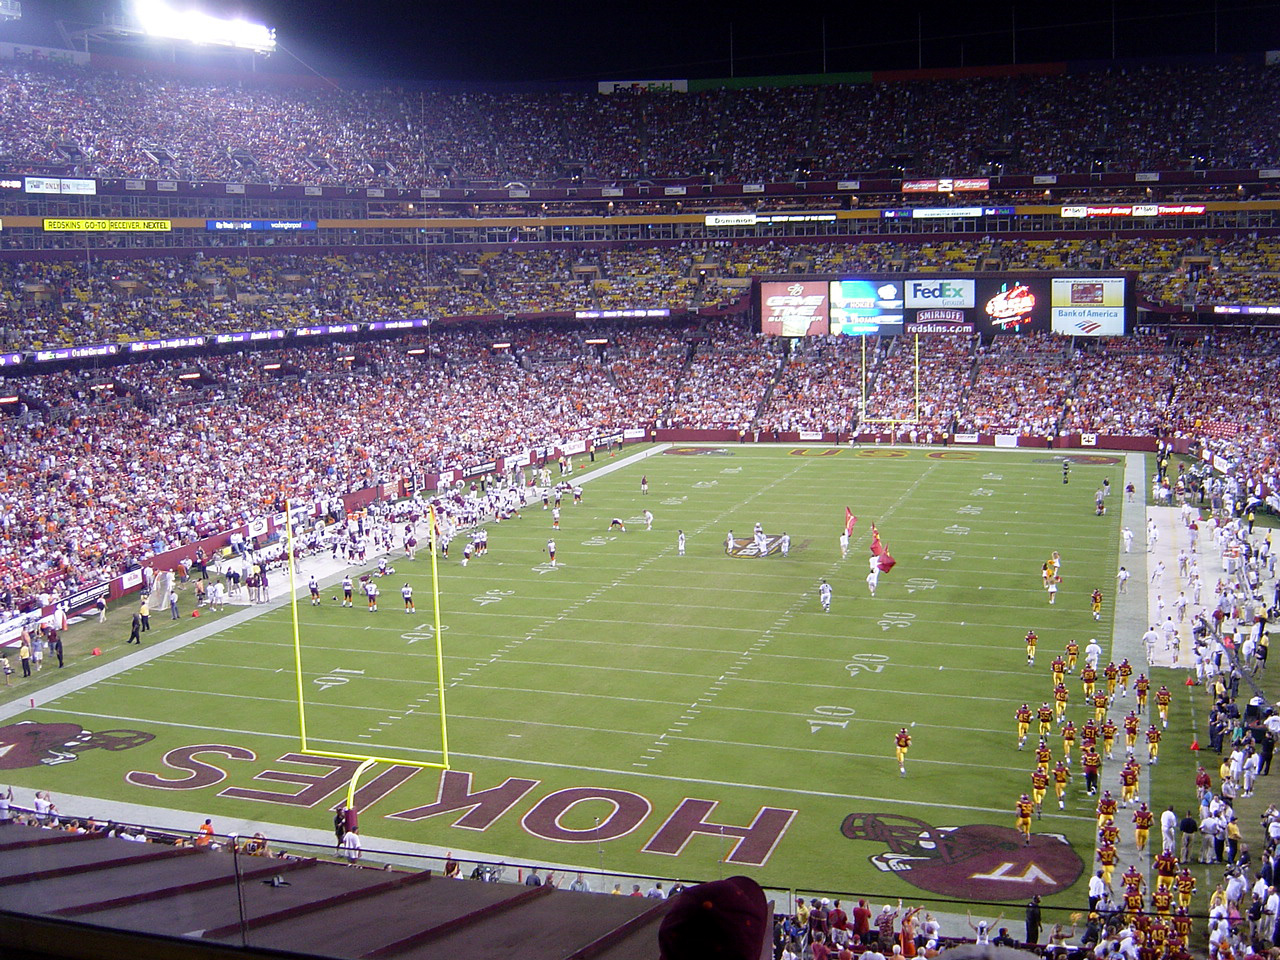 The Irish and Terps to Play at FedEx in 2011